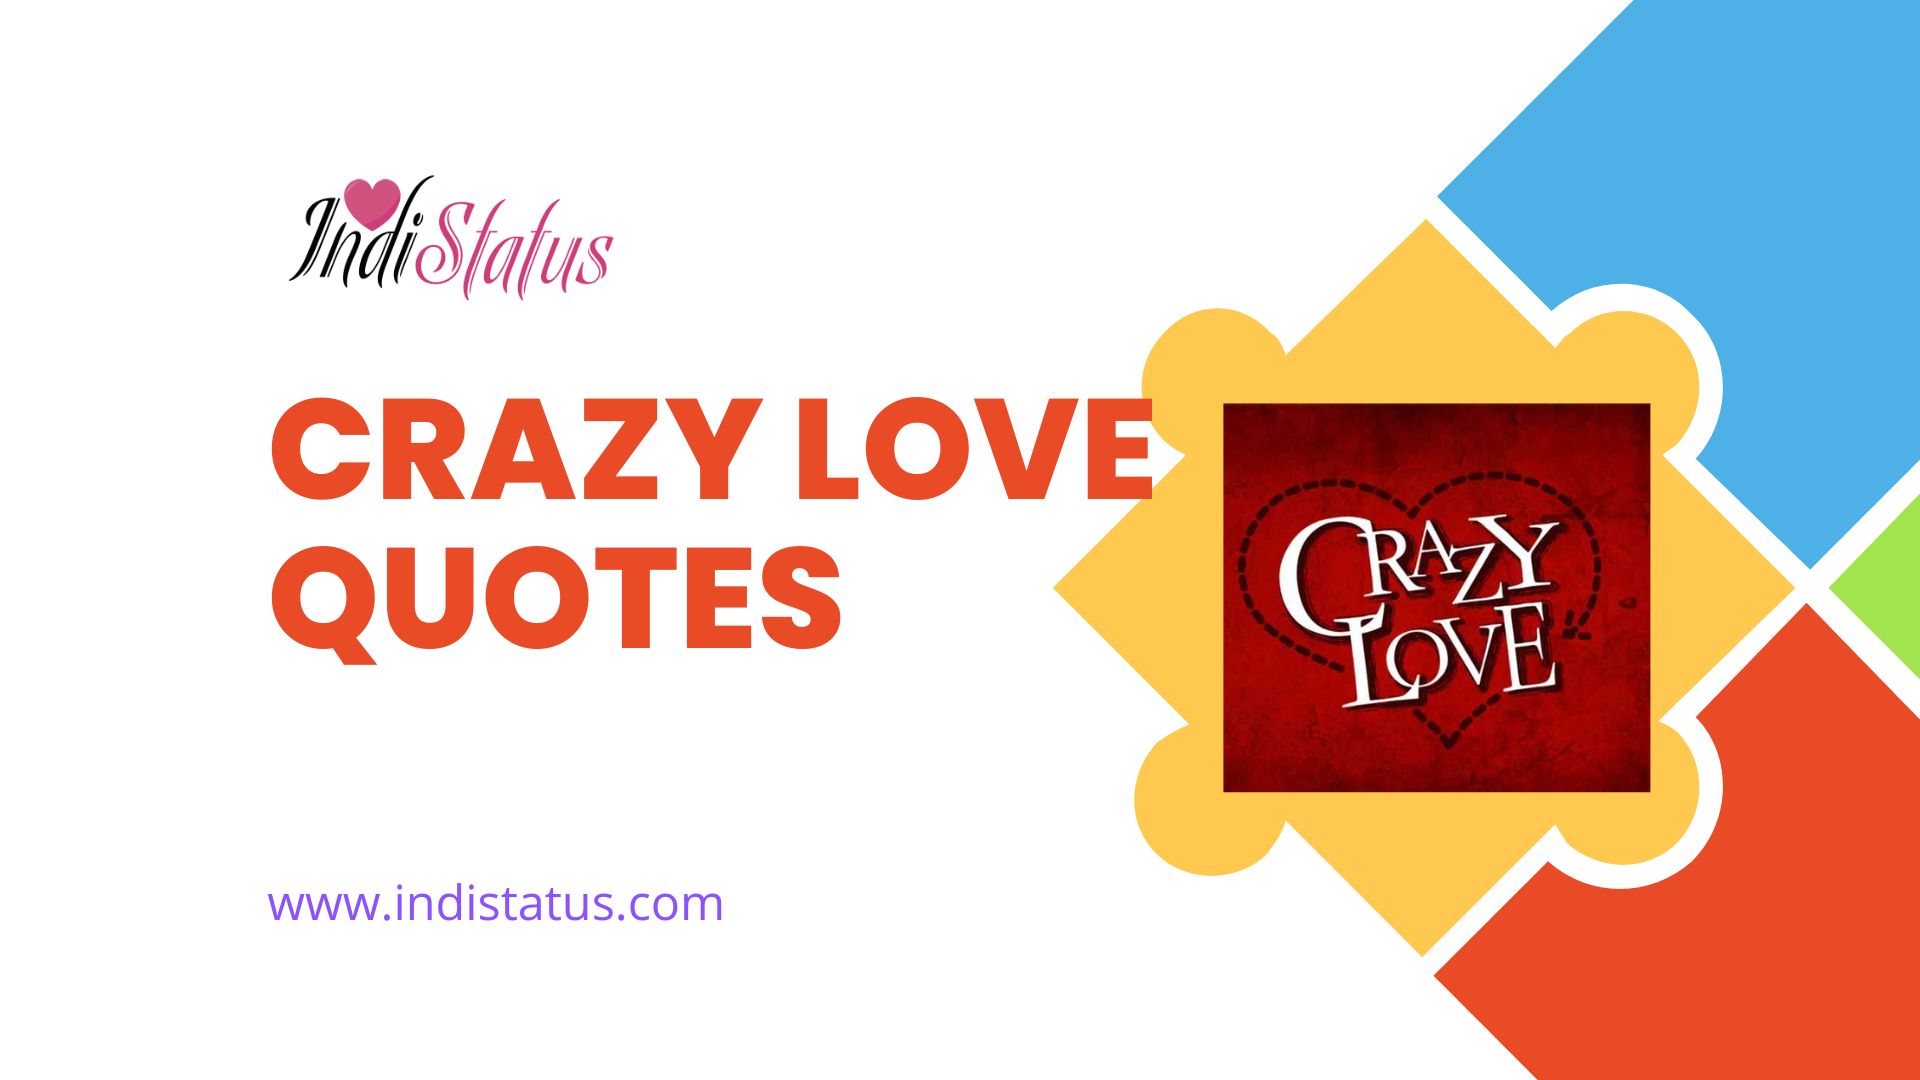 250+ Crazy Love Quotes to Express Deep Feelings - IndiStatus